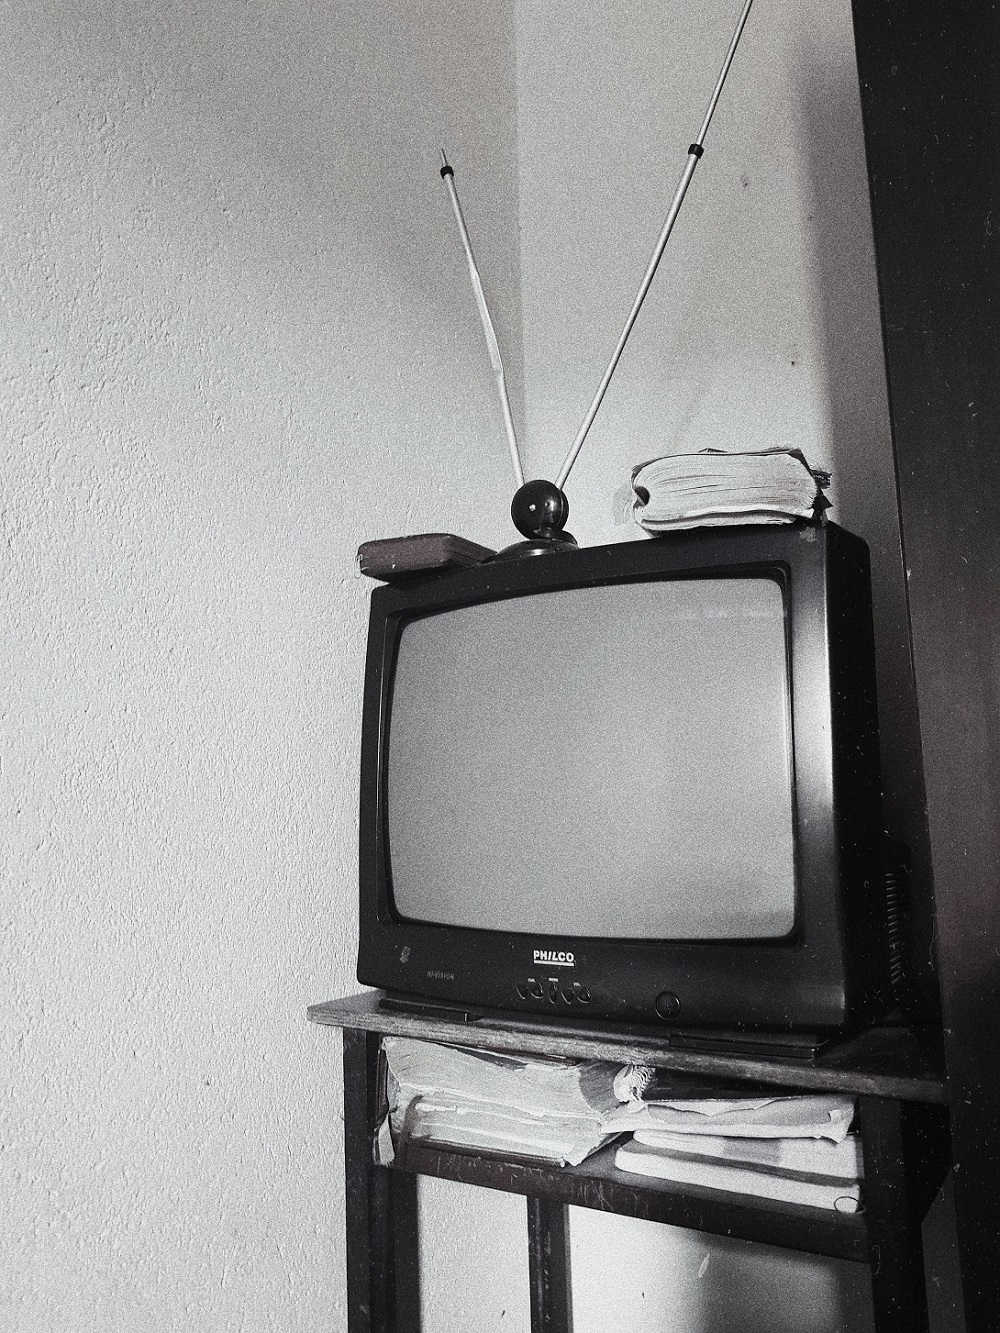 Gray scale photo analogue of television via Pexels